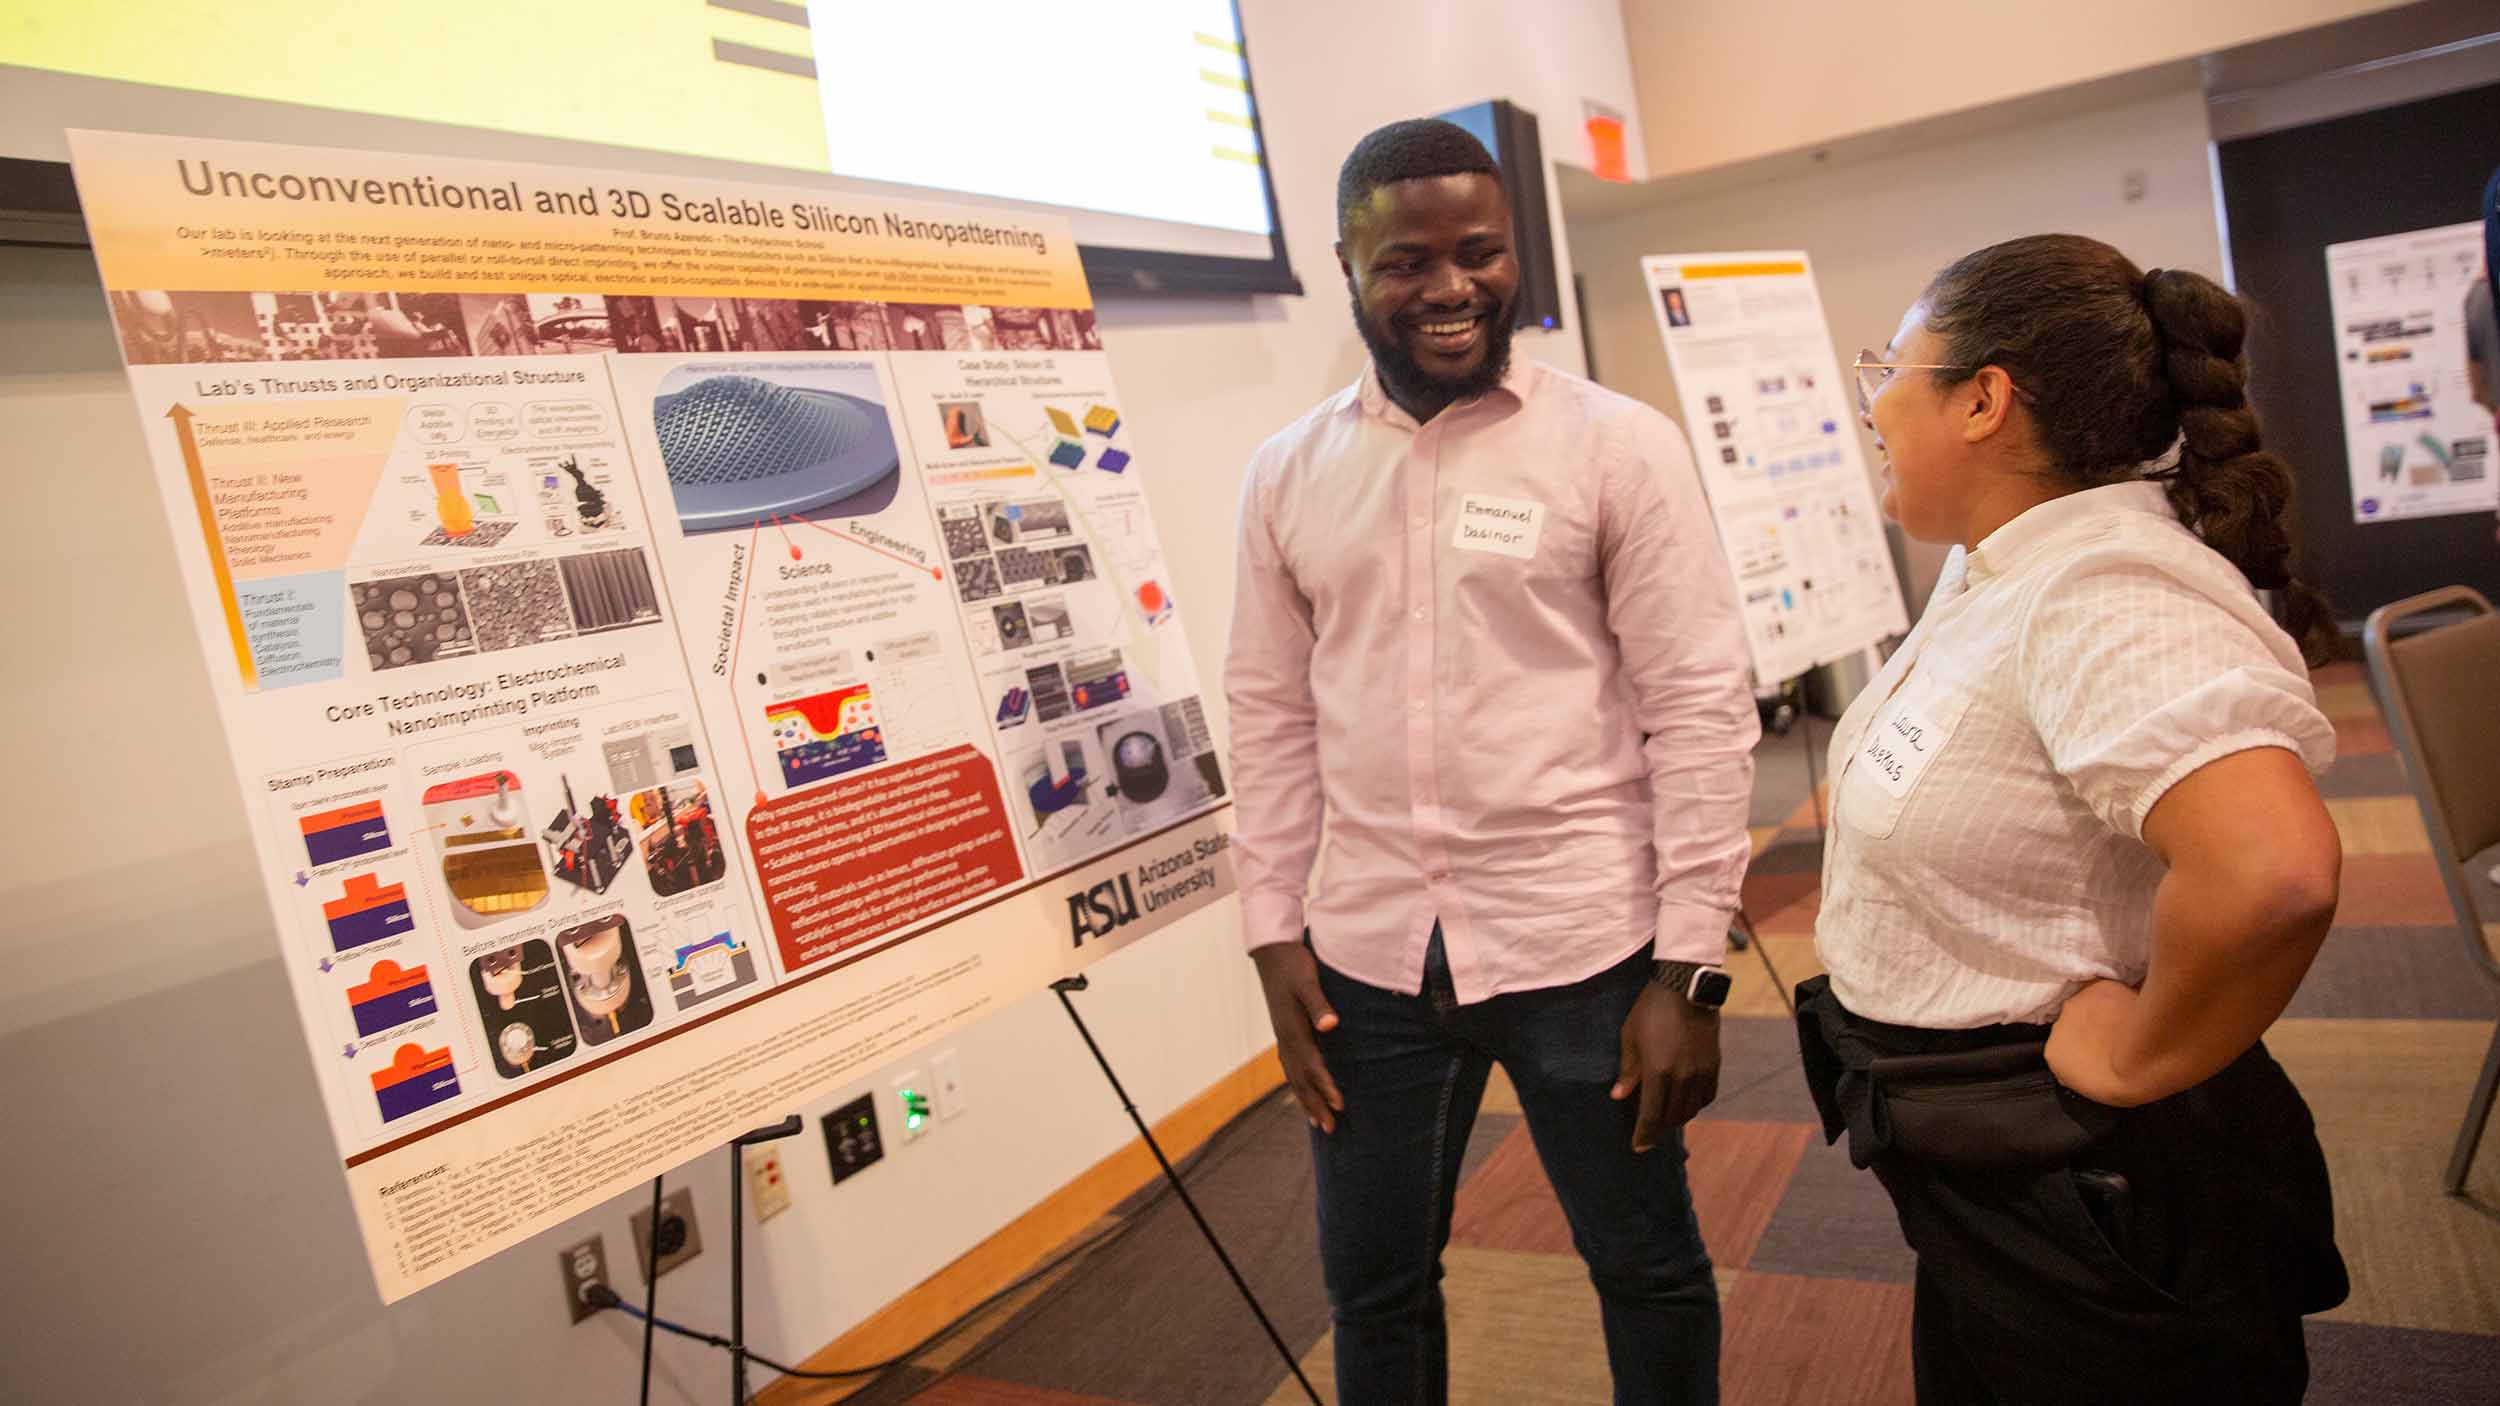 Mechanical engineering Graduate Research Associate Emmanuel Dasinor stands next to Laura Duenas Gonzalez by their research poster at the School of Manufacturing Systems and Networks open house event